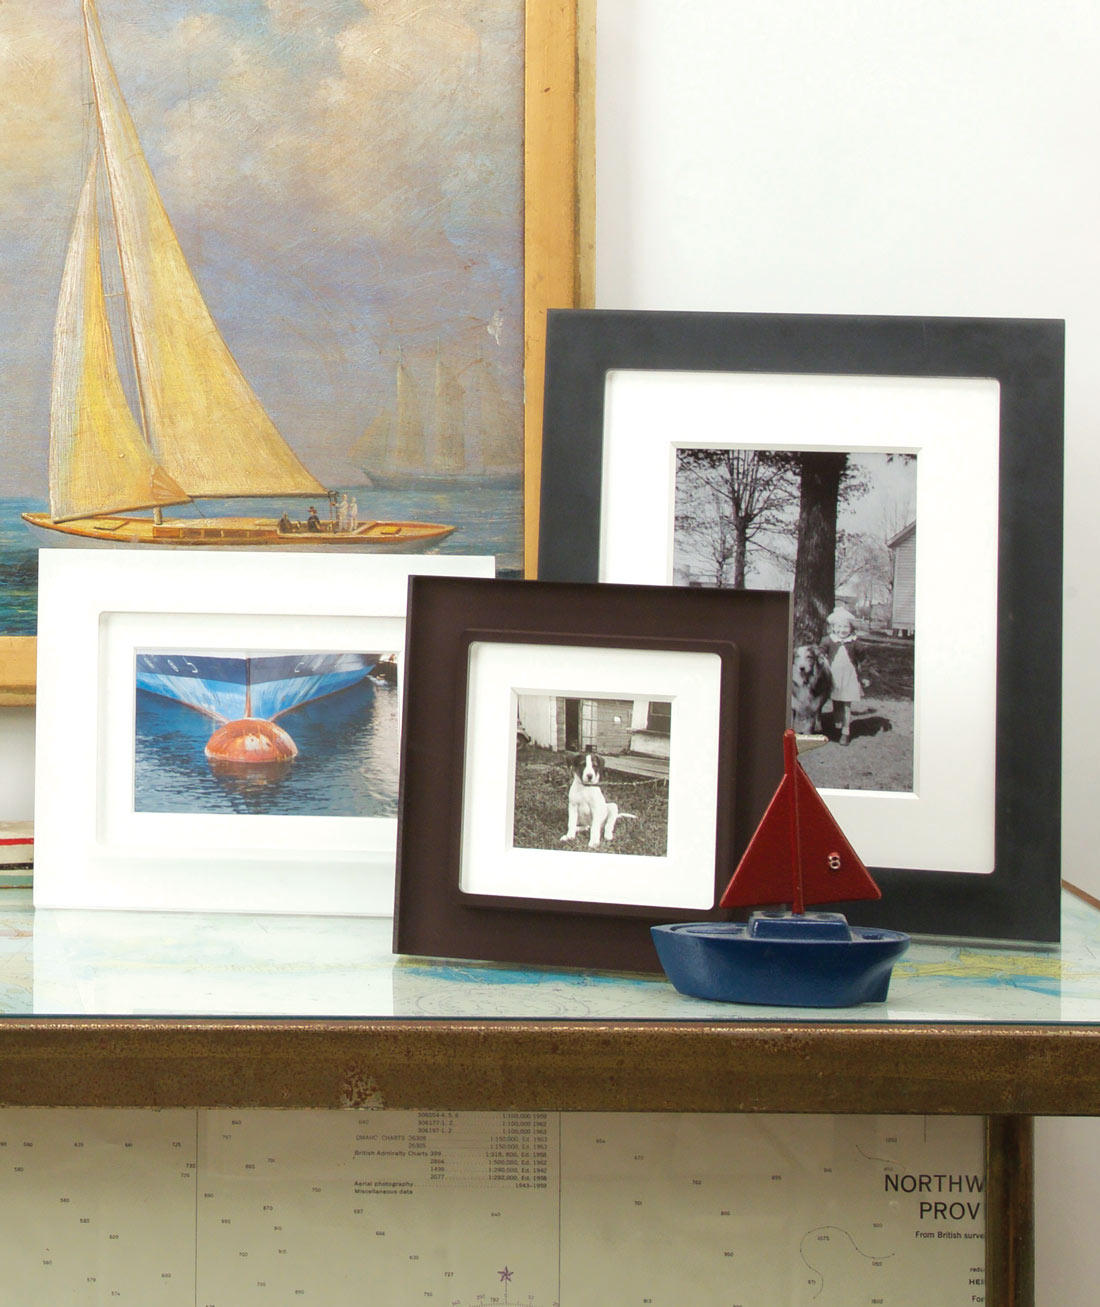 Grouping of chocolate brown, white and black frames on a glass desk with sailing decor and family photos